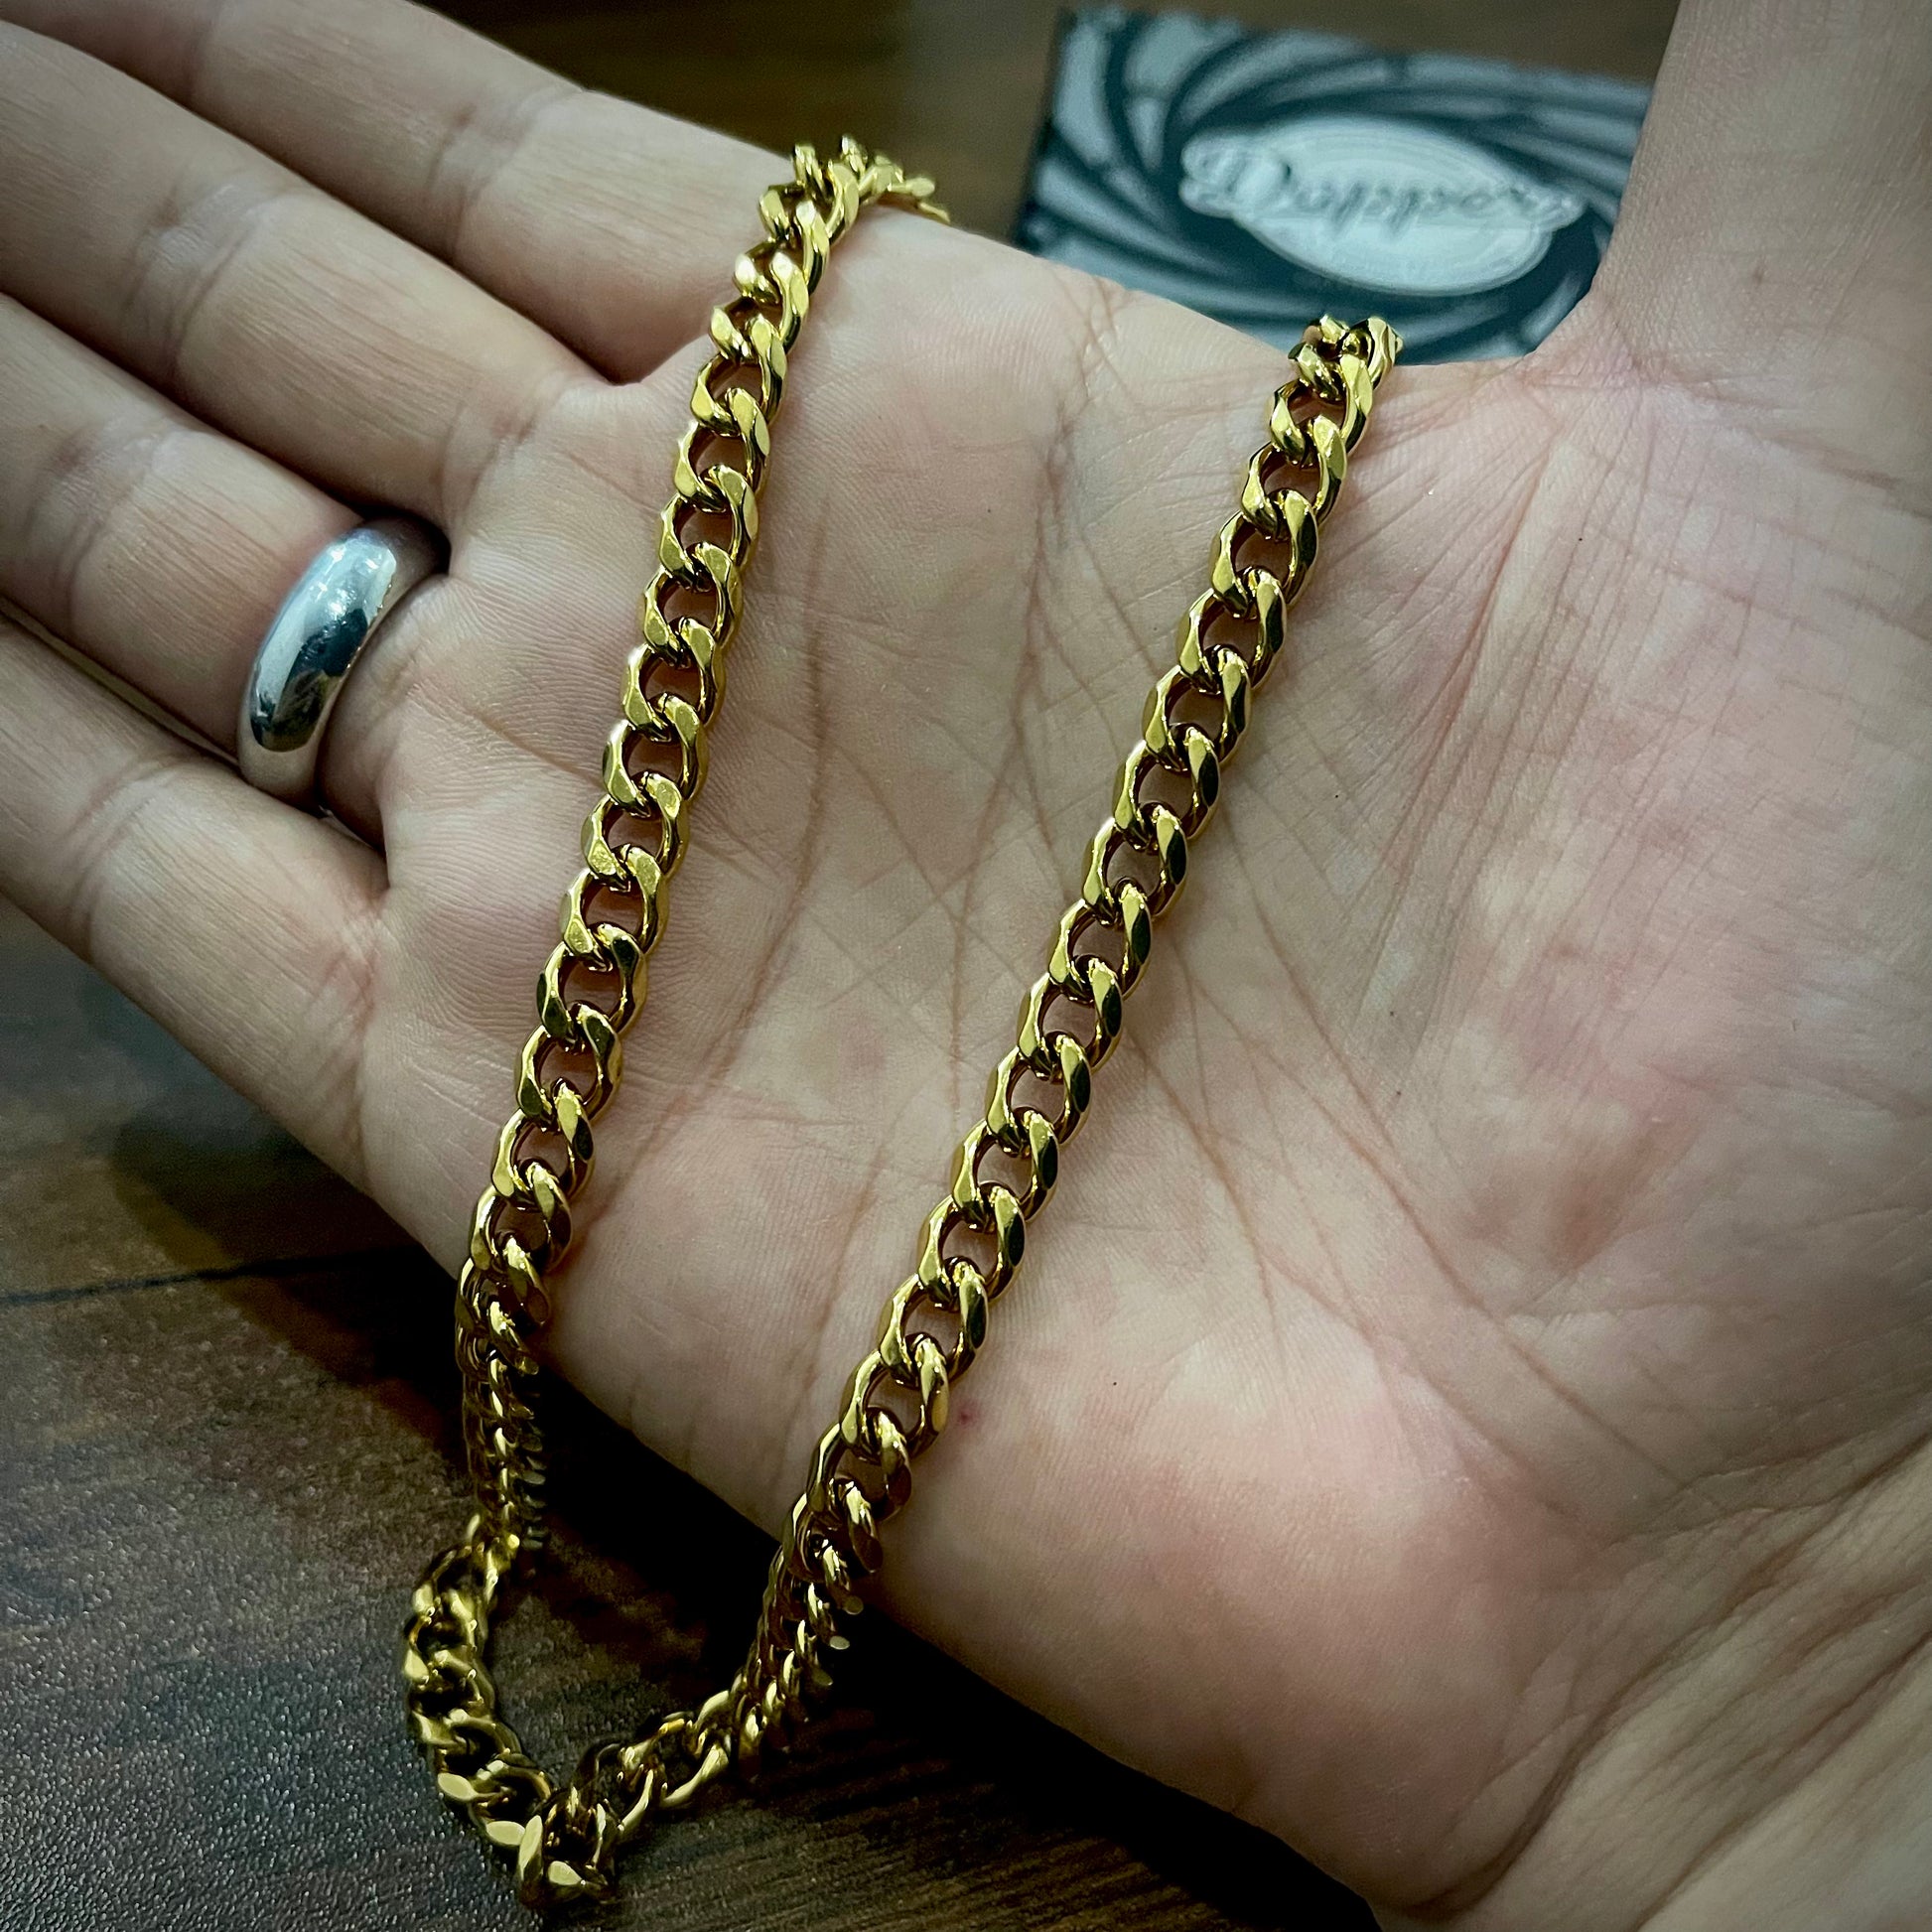 7mm stainless steel cuban curb link neck chain for men online in pakistan